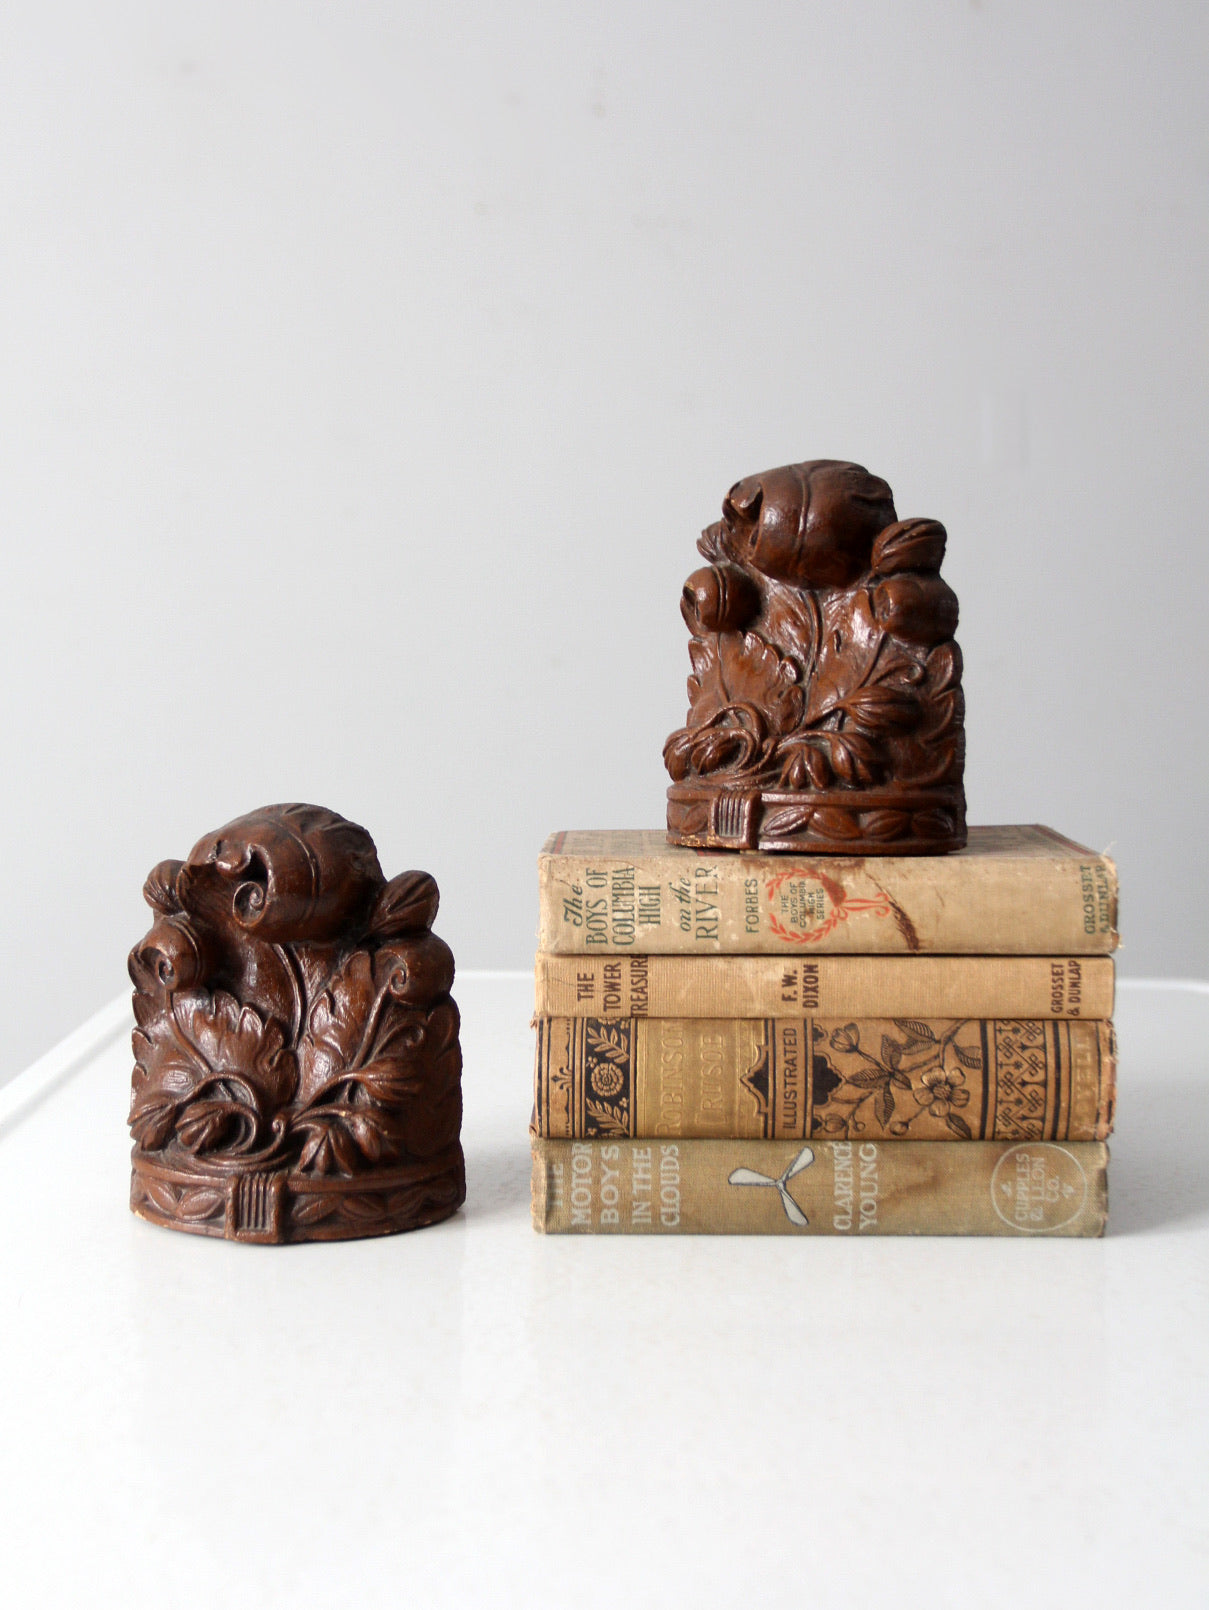 vintage Syroco style floral bookends pair